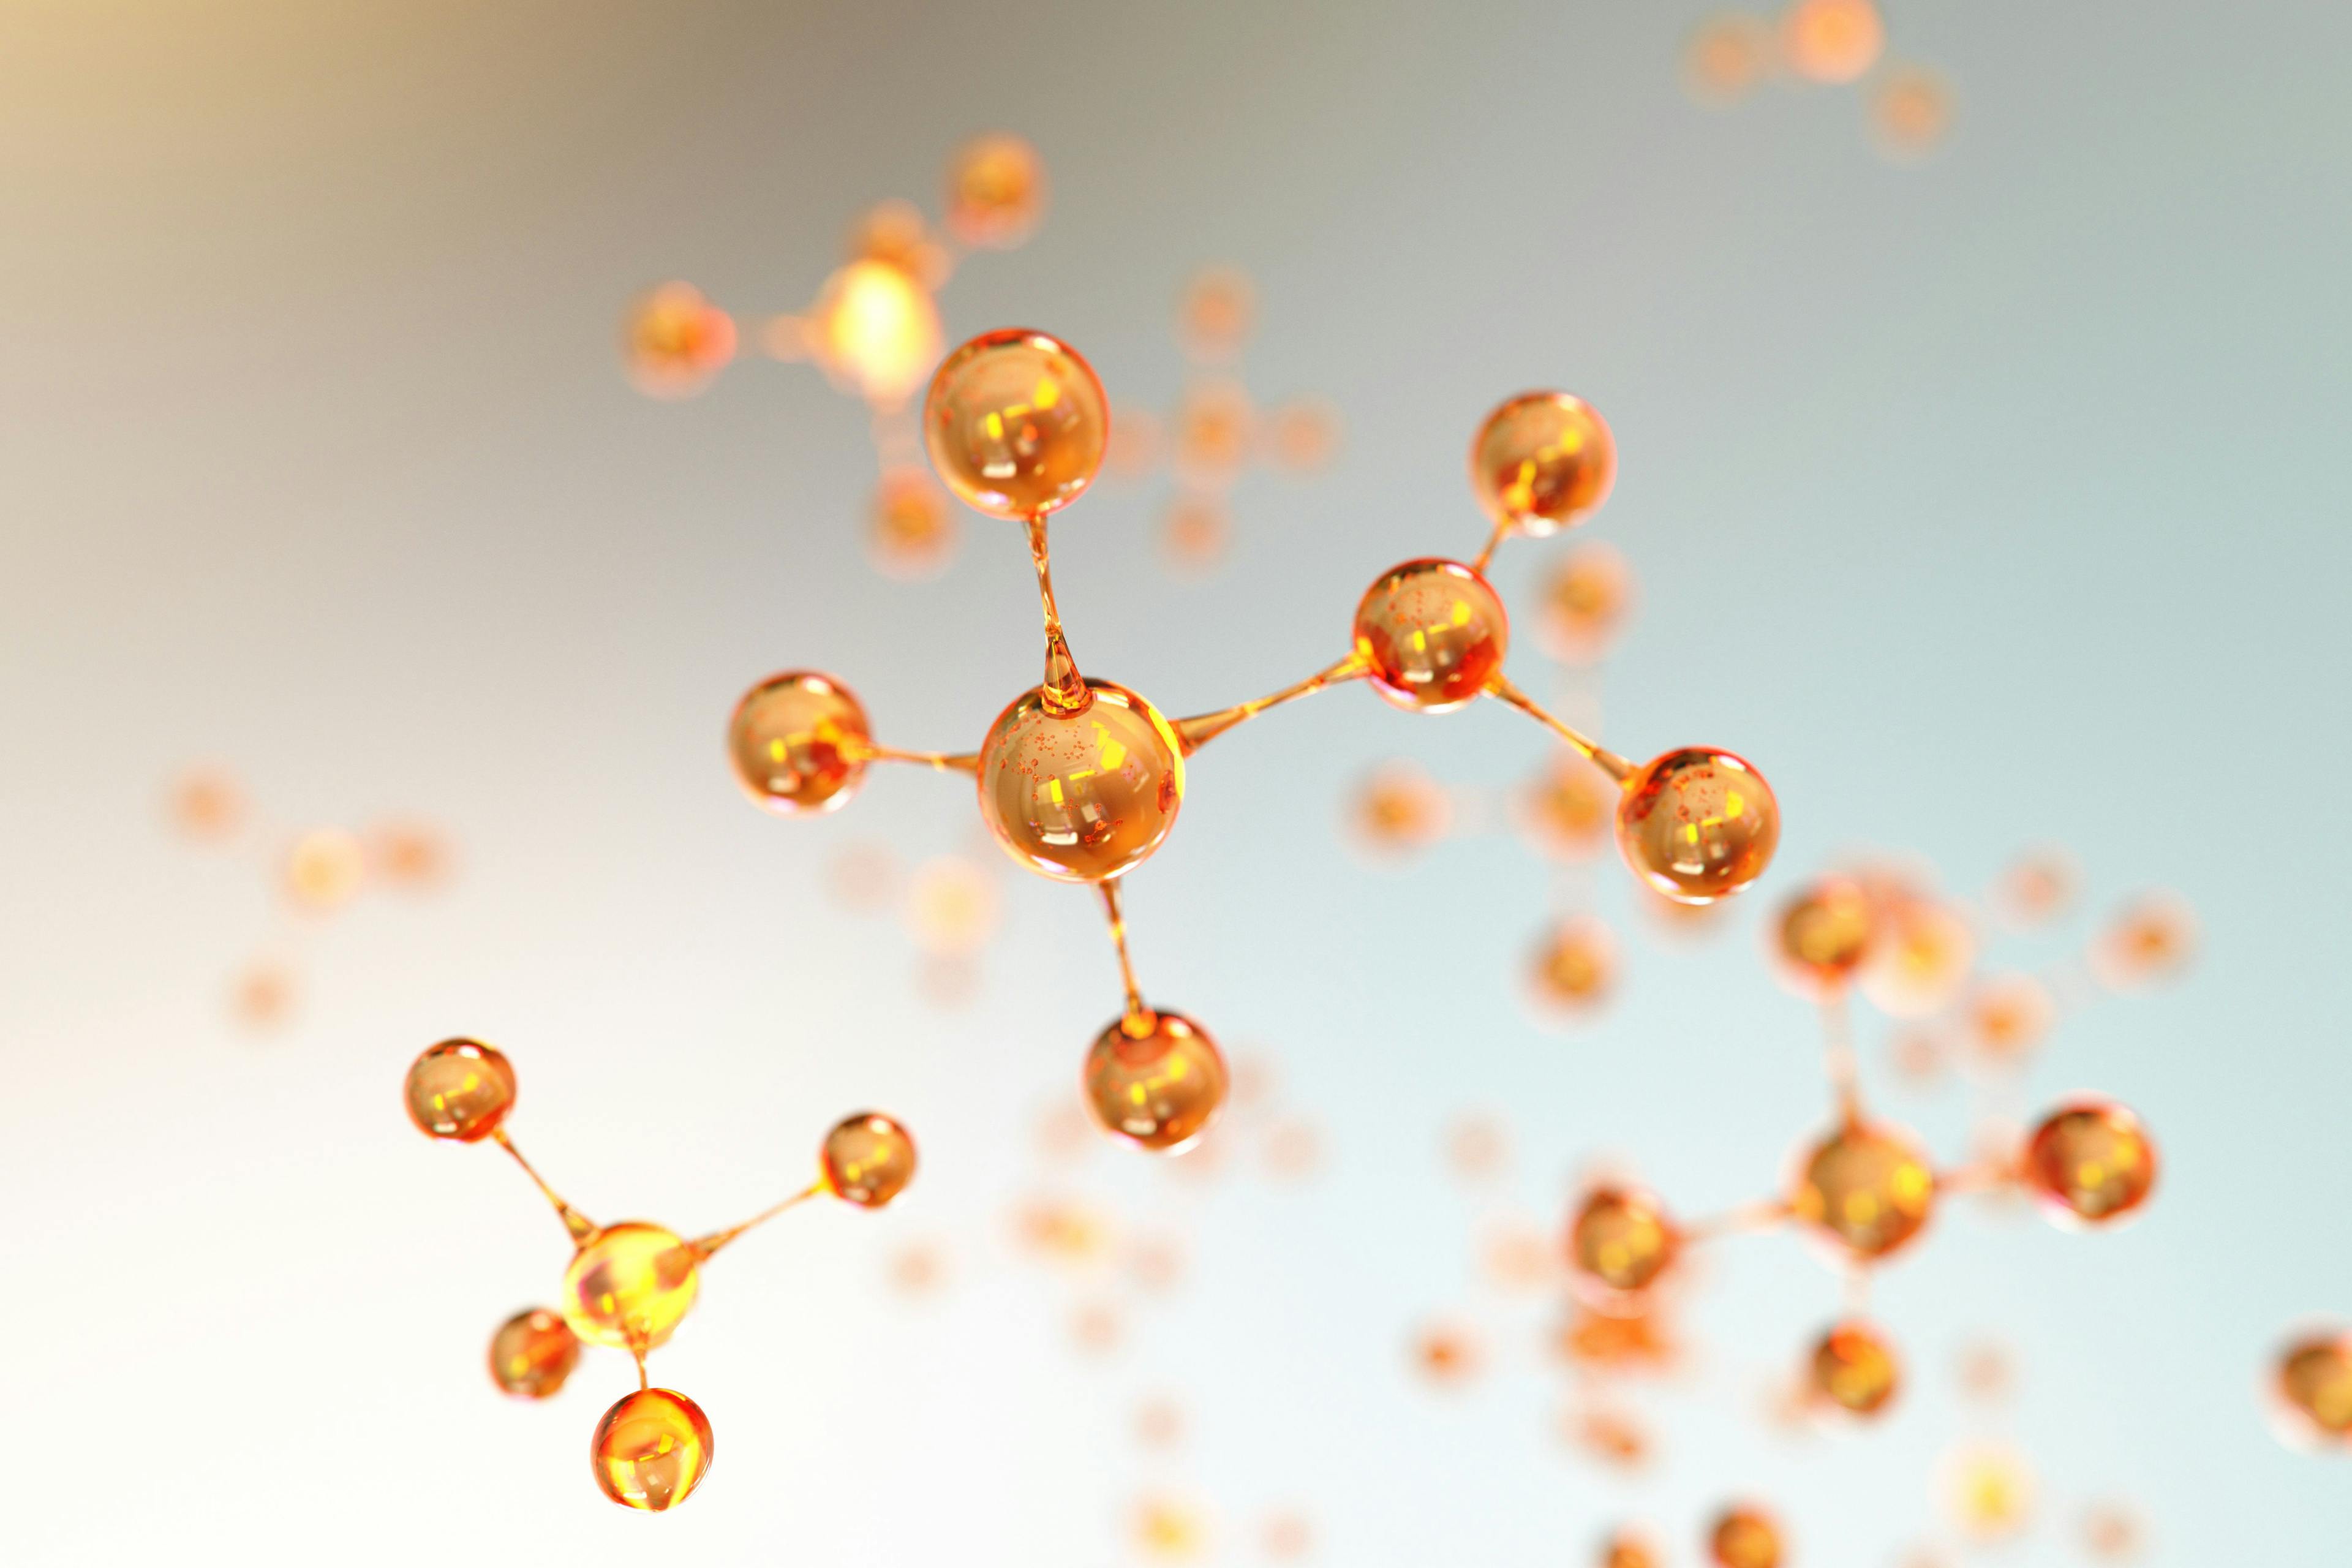 Abstract Molecule Background | Image Credit: © Connect world - stock.adobe.com